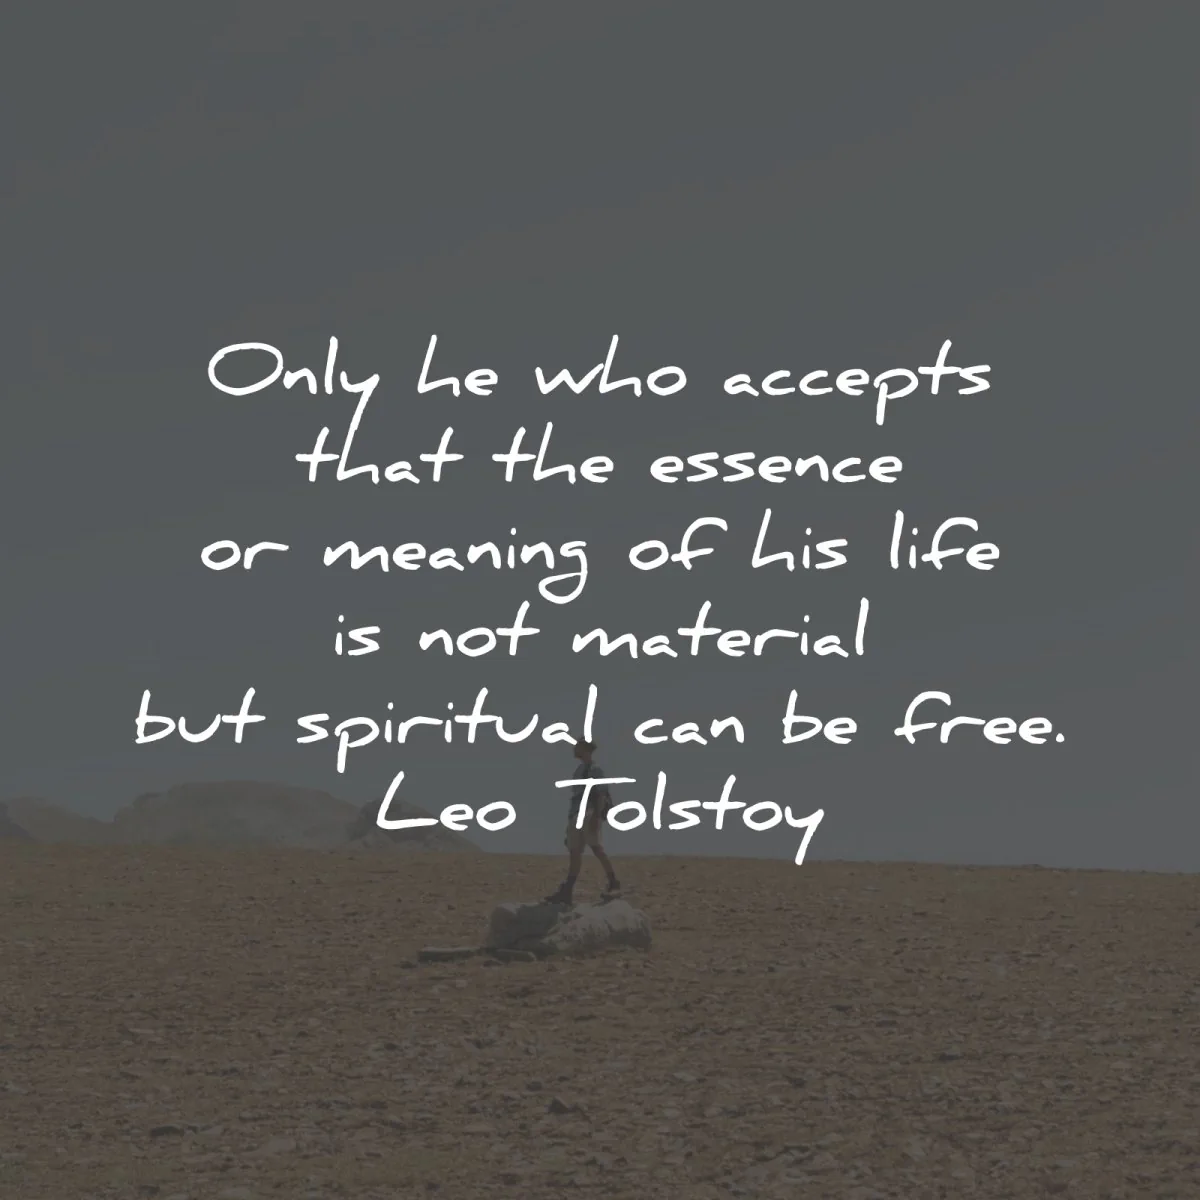 leo tolstoy quotes only accepts essence meaning life wisdom